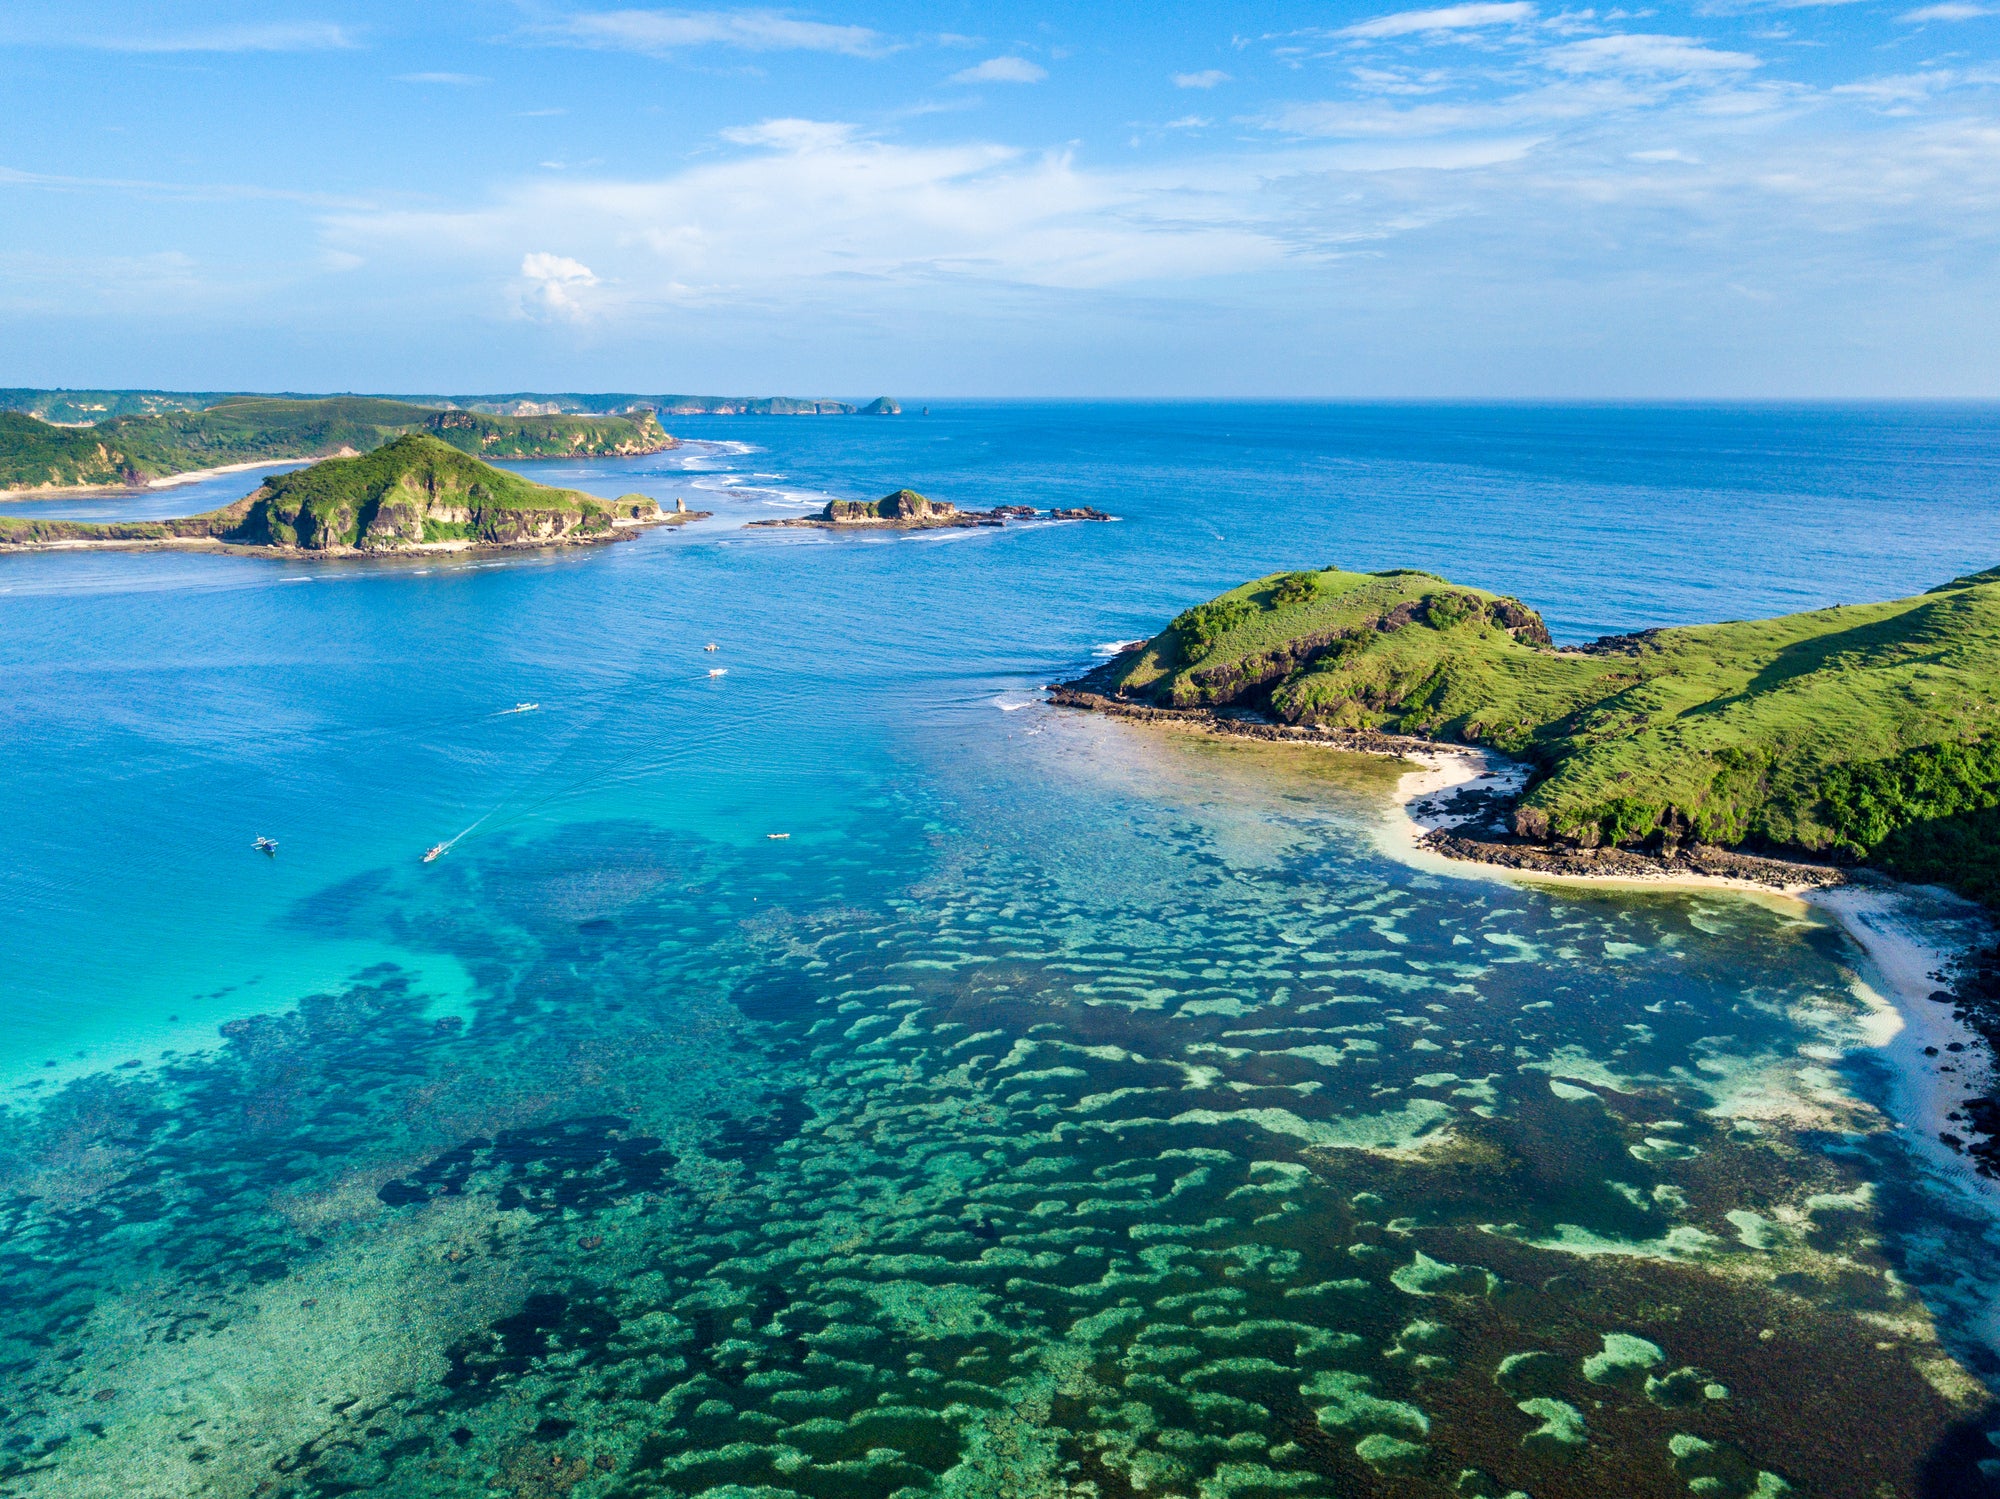 Get a sun fix ahead of summer with a holiday to Lombok in May